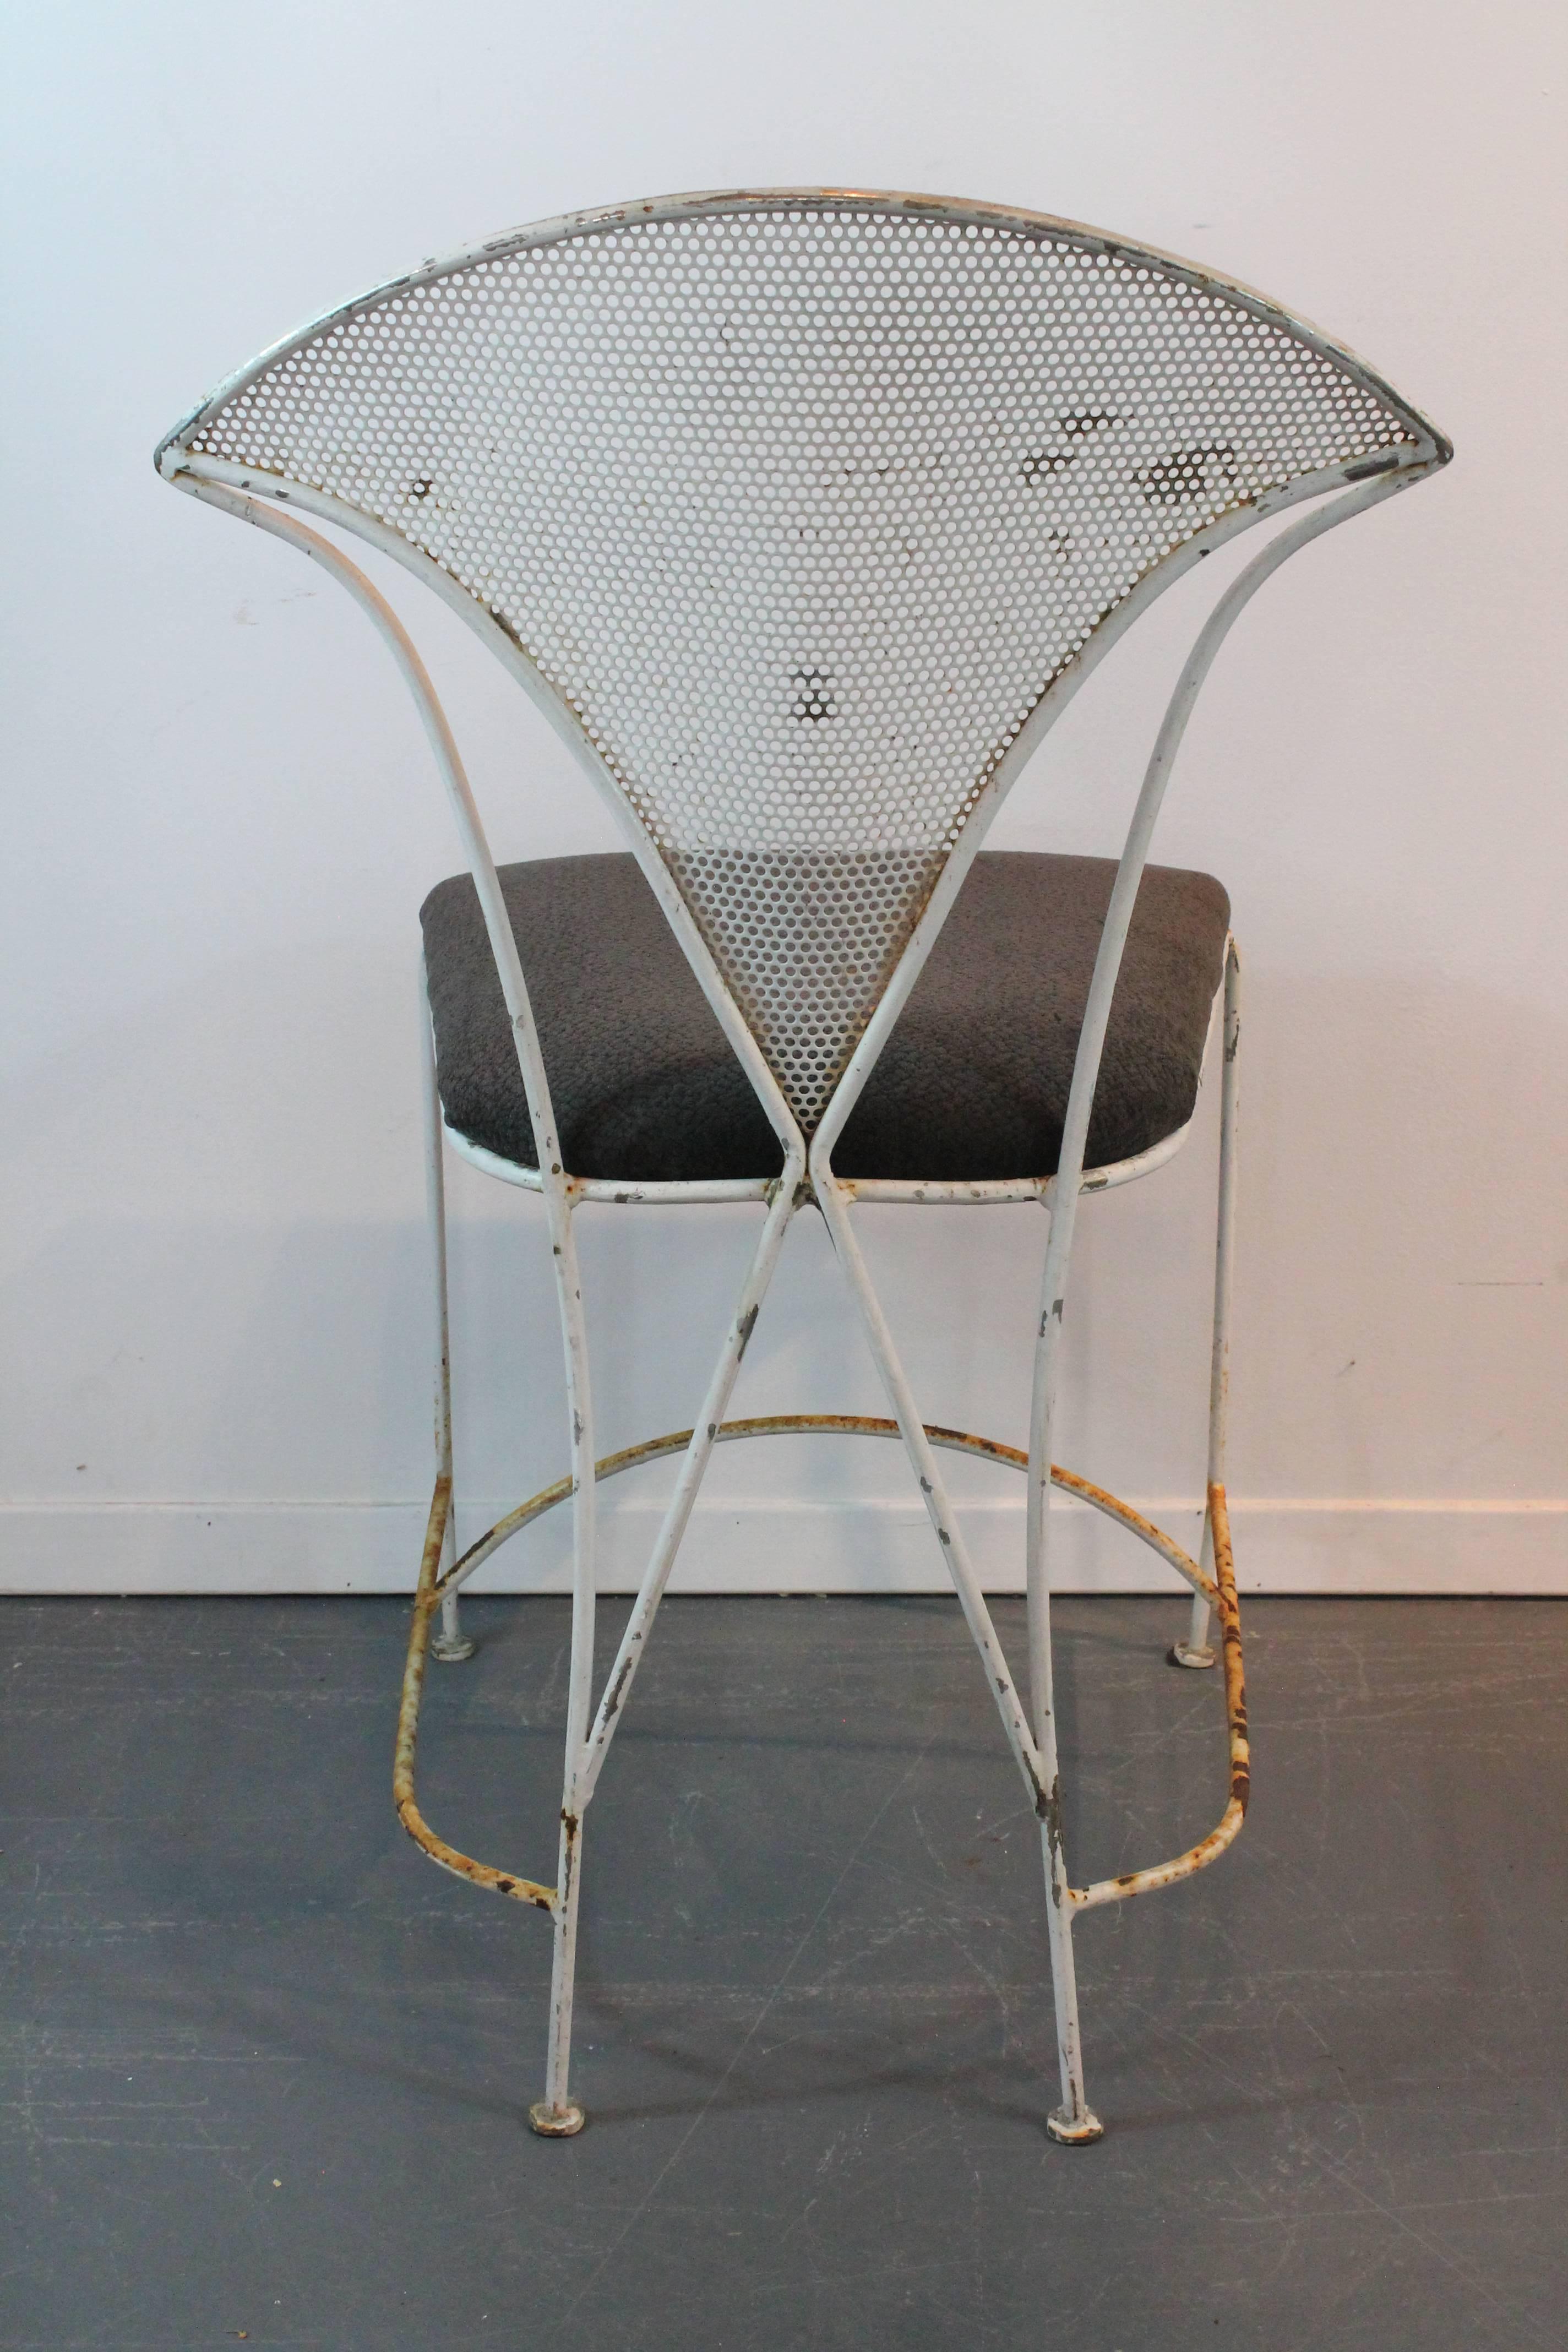 Wonderful perforated triangular backs on this set of four iron sculptural chairs.
Exceptional lines on the back with the x pattern and the curved leg supports.
Oxidation and rust throughout, likely used as garden chairs.
Newly reupholstered.